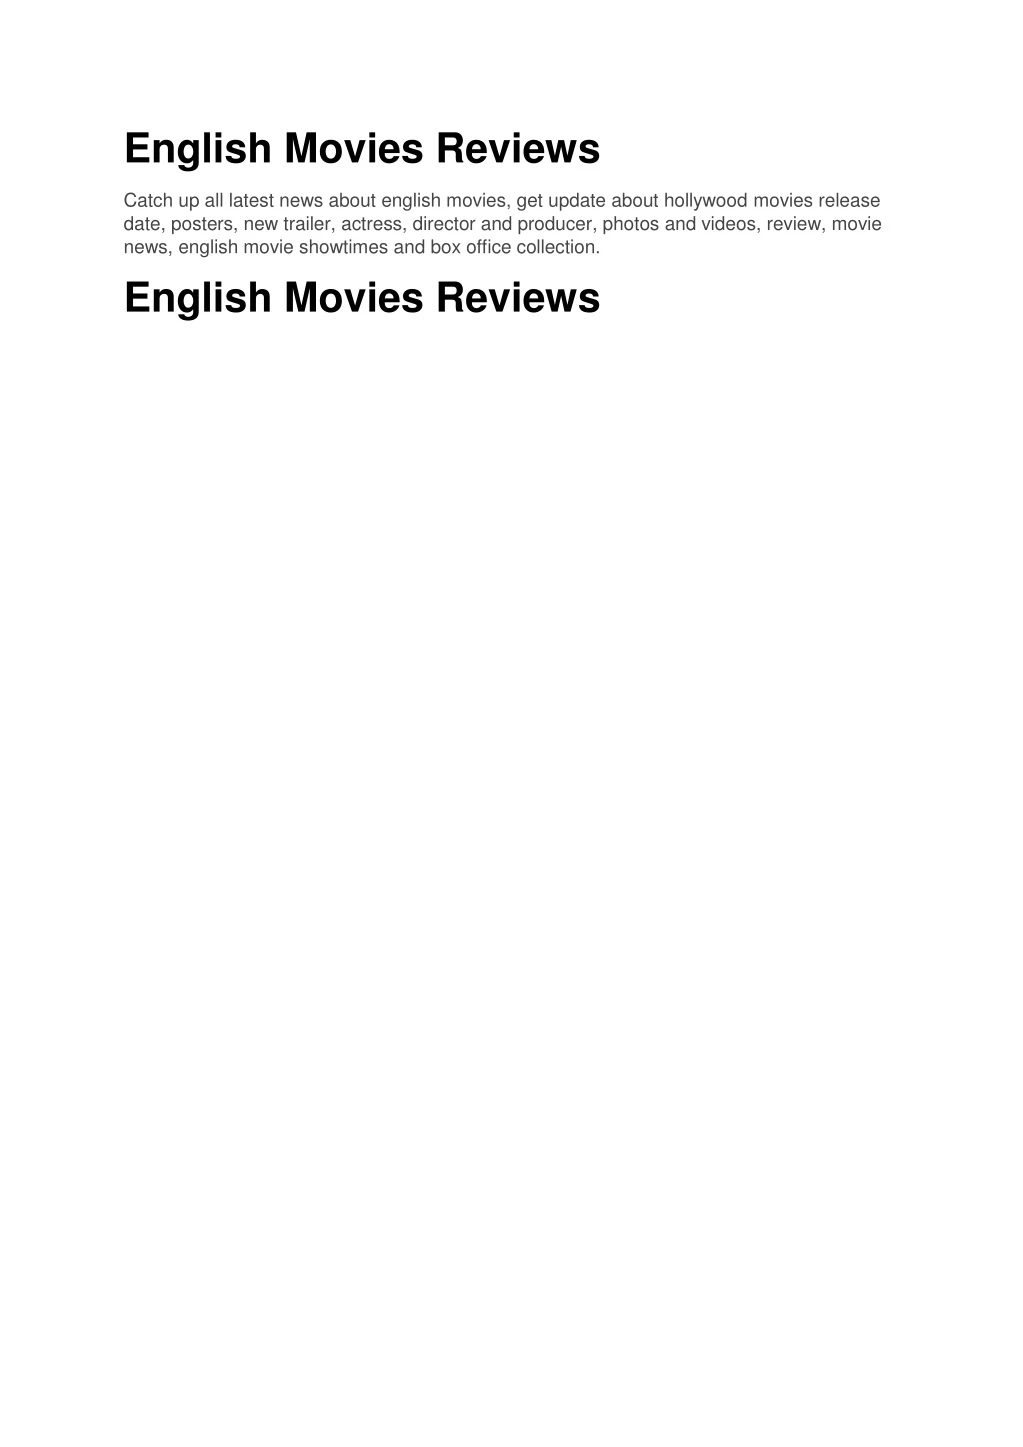 PPT English Movies Reviews PowerPoint Presentation, free download